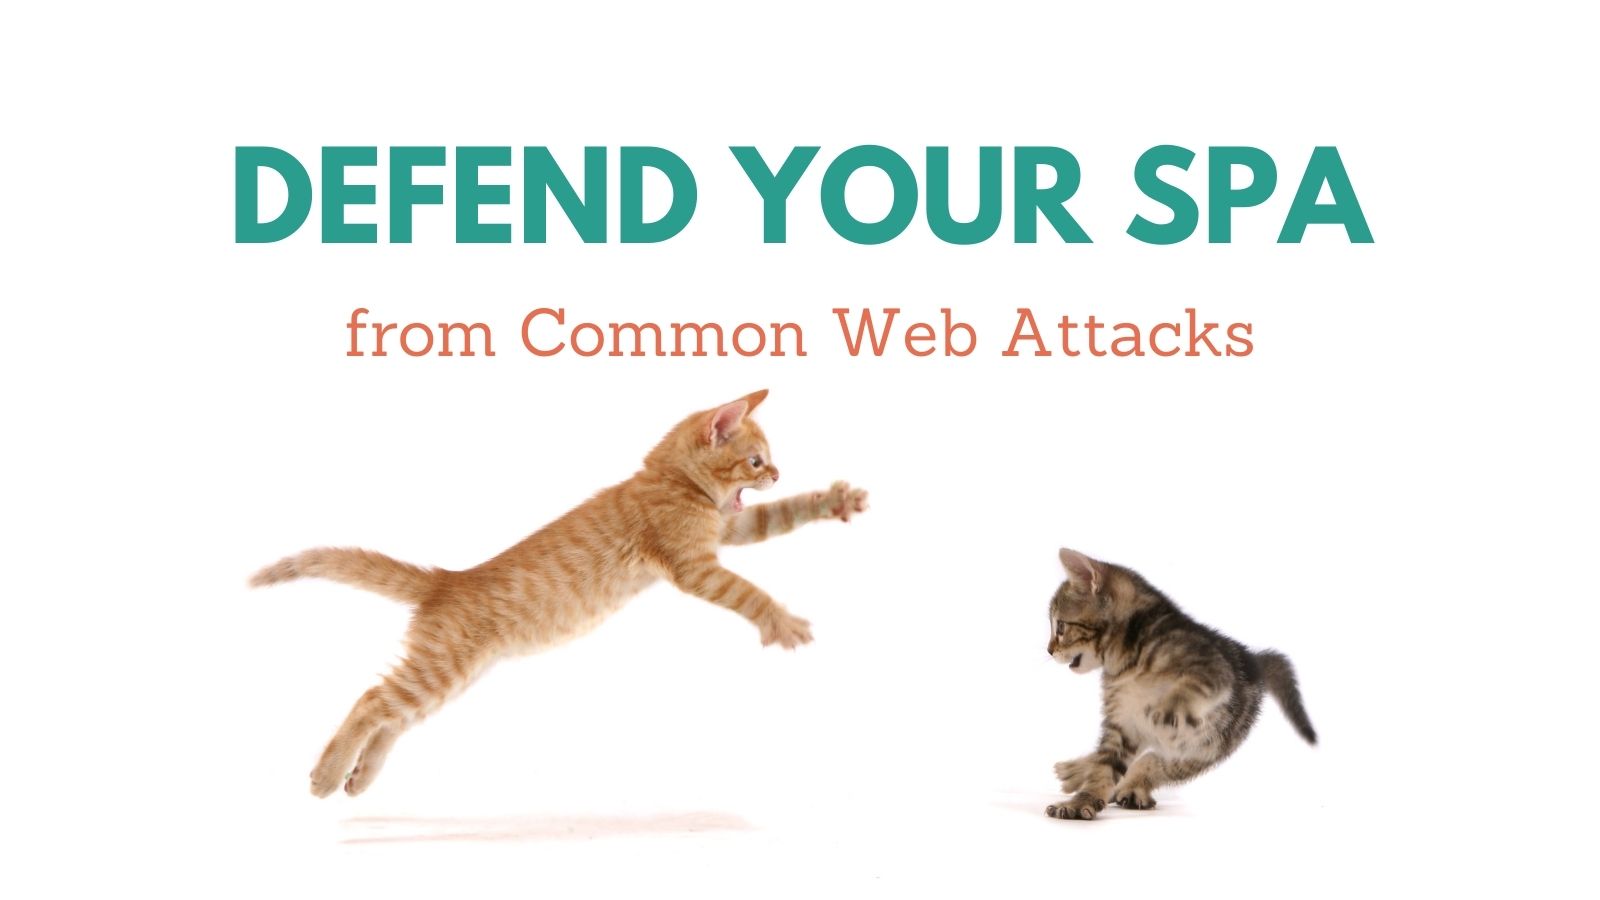 Defend Your SPA from Common Web Attacks